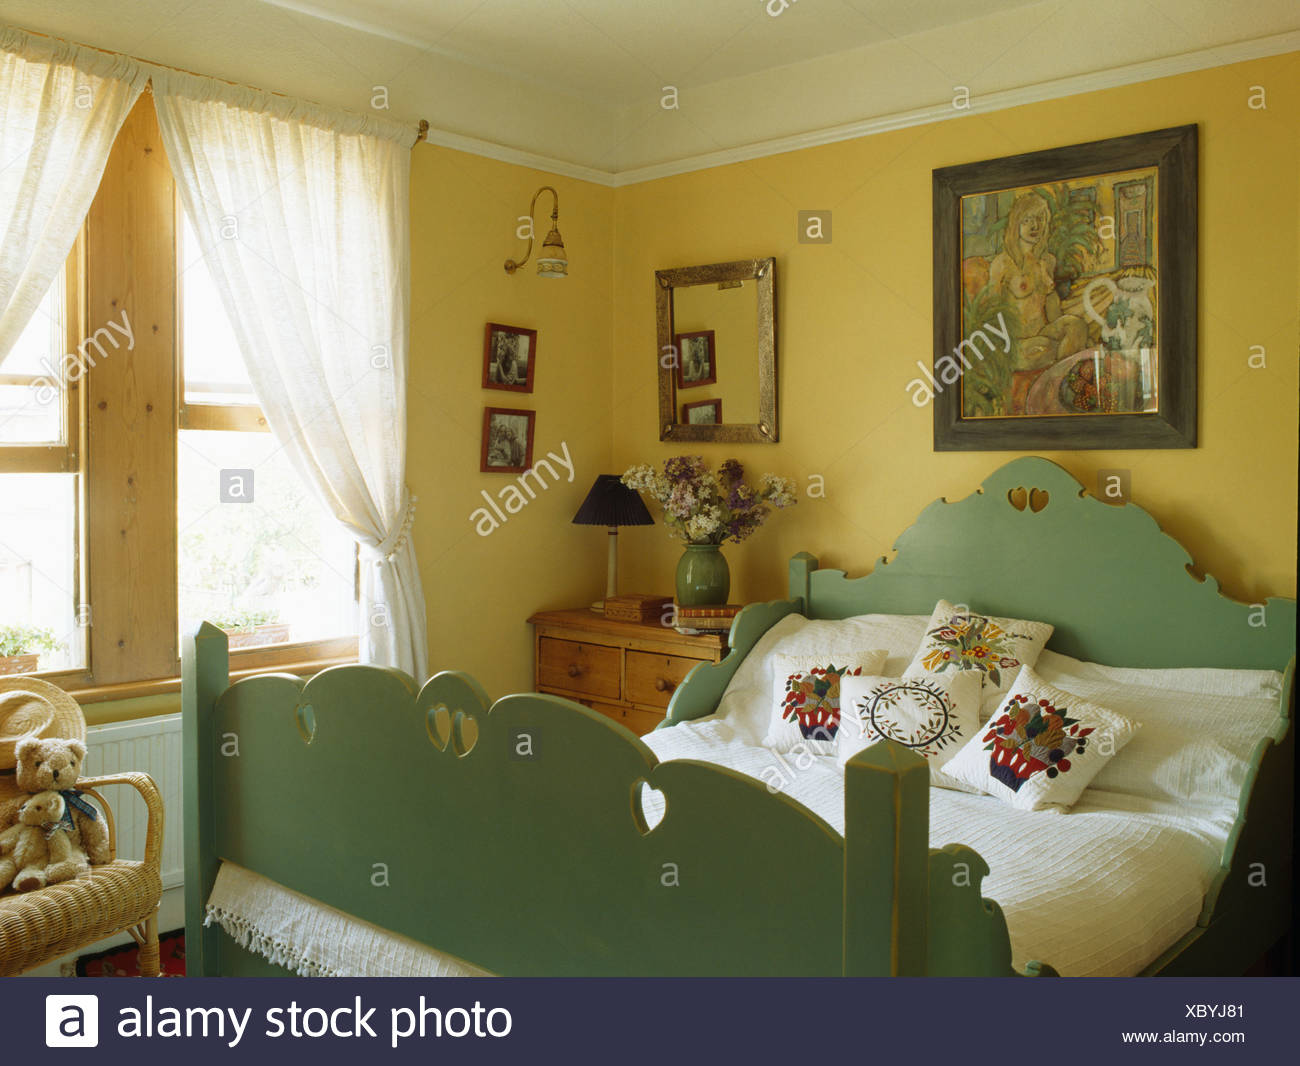 Picture On Wall Above Green Painted Wooden Bed With